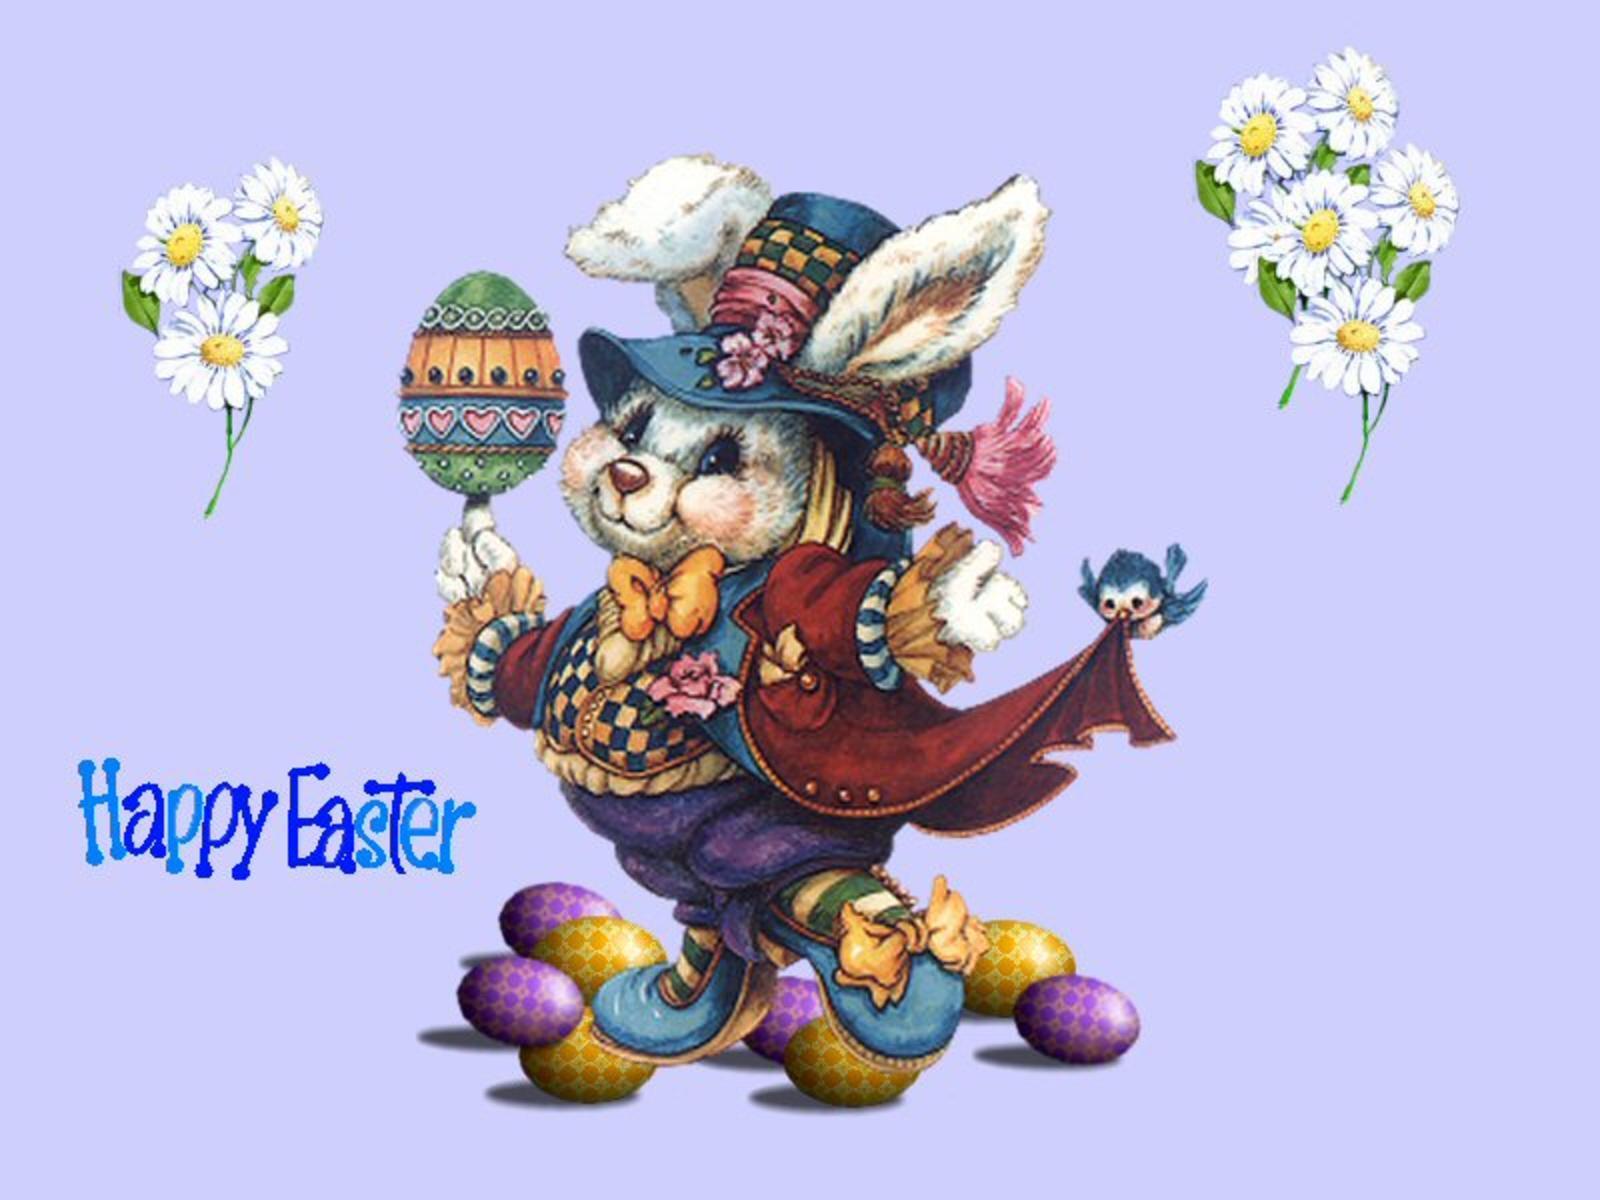 Happy Easter Image, Easter Sunday GIF, Pics & Photo for Whatsapp